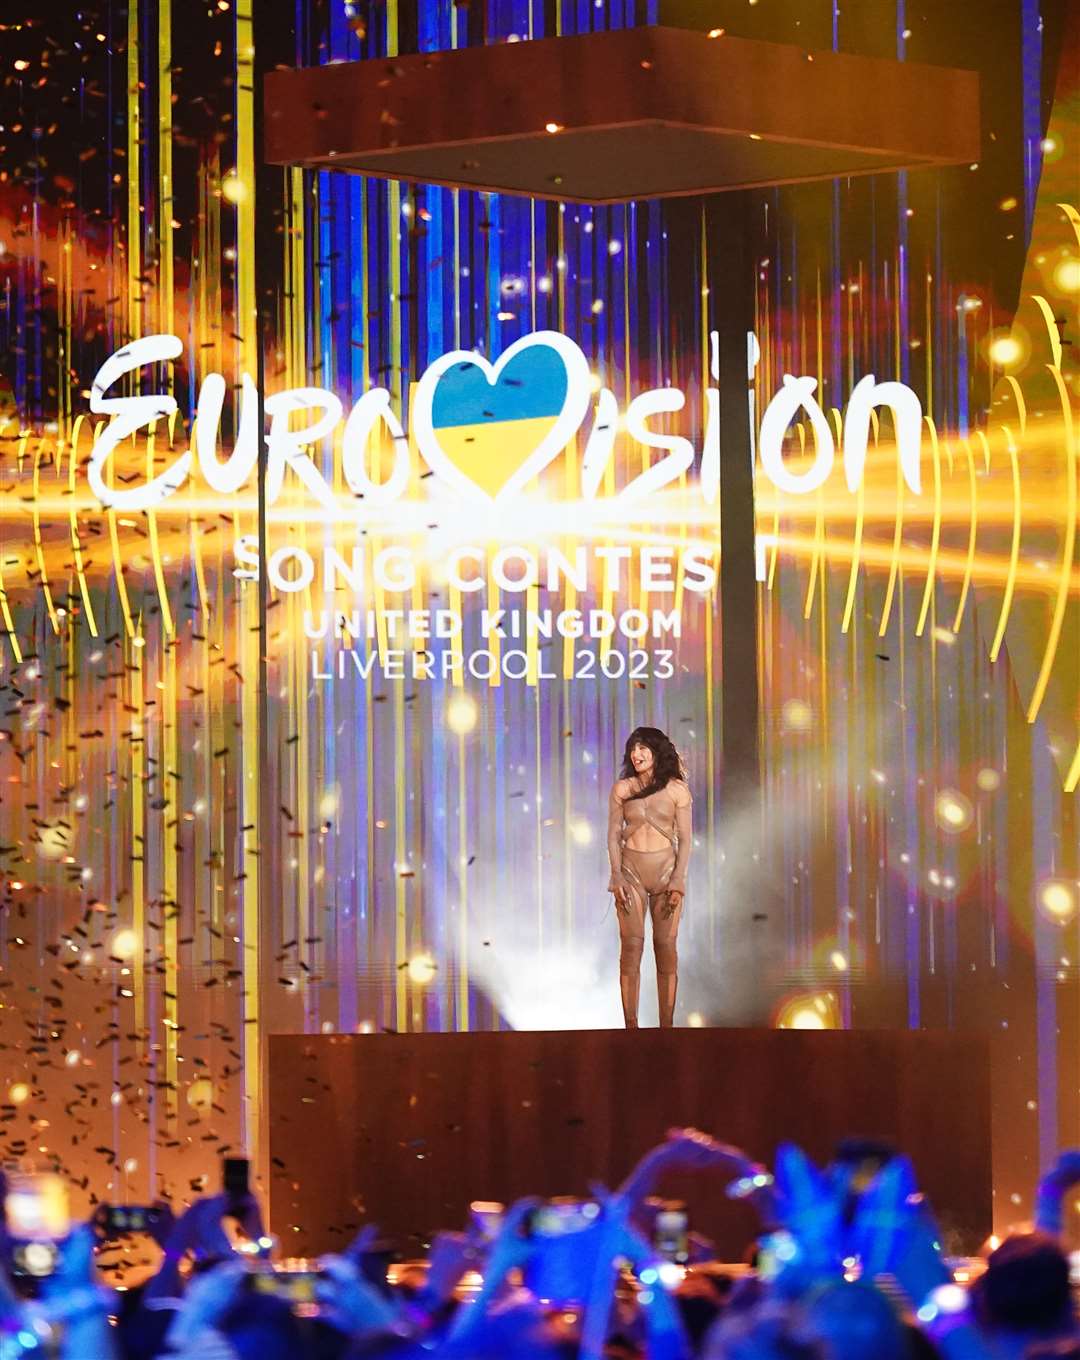 Sweden entrant Loreen after winning the Eurovision Song Contest at the M&S Bank Arena in Liverpool (Aaron Chown/PA)